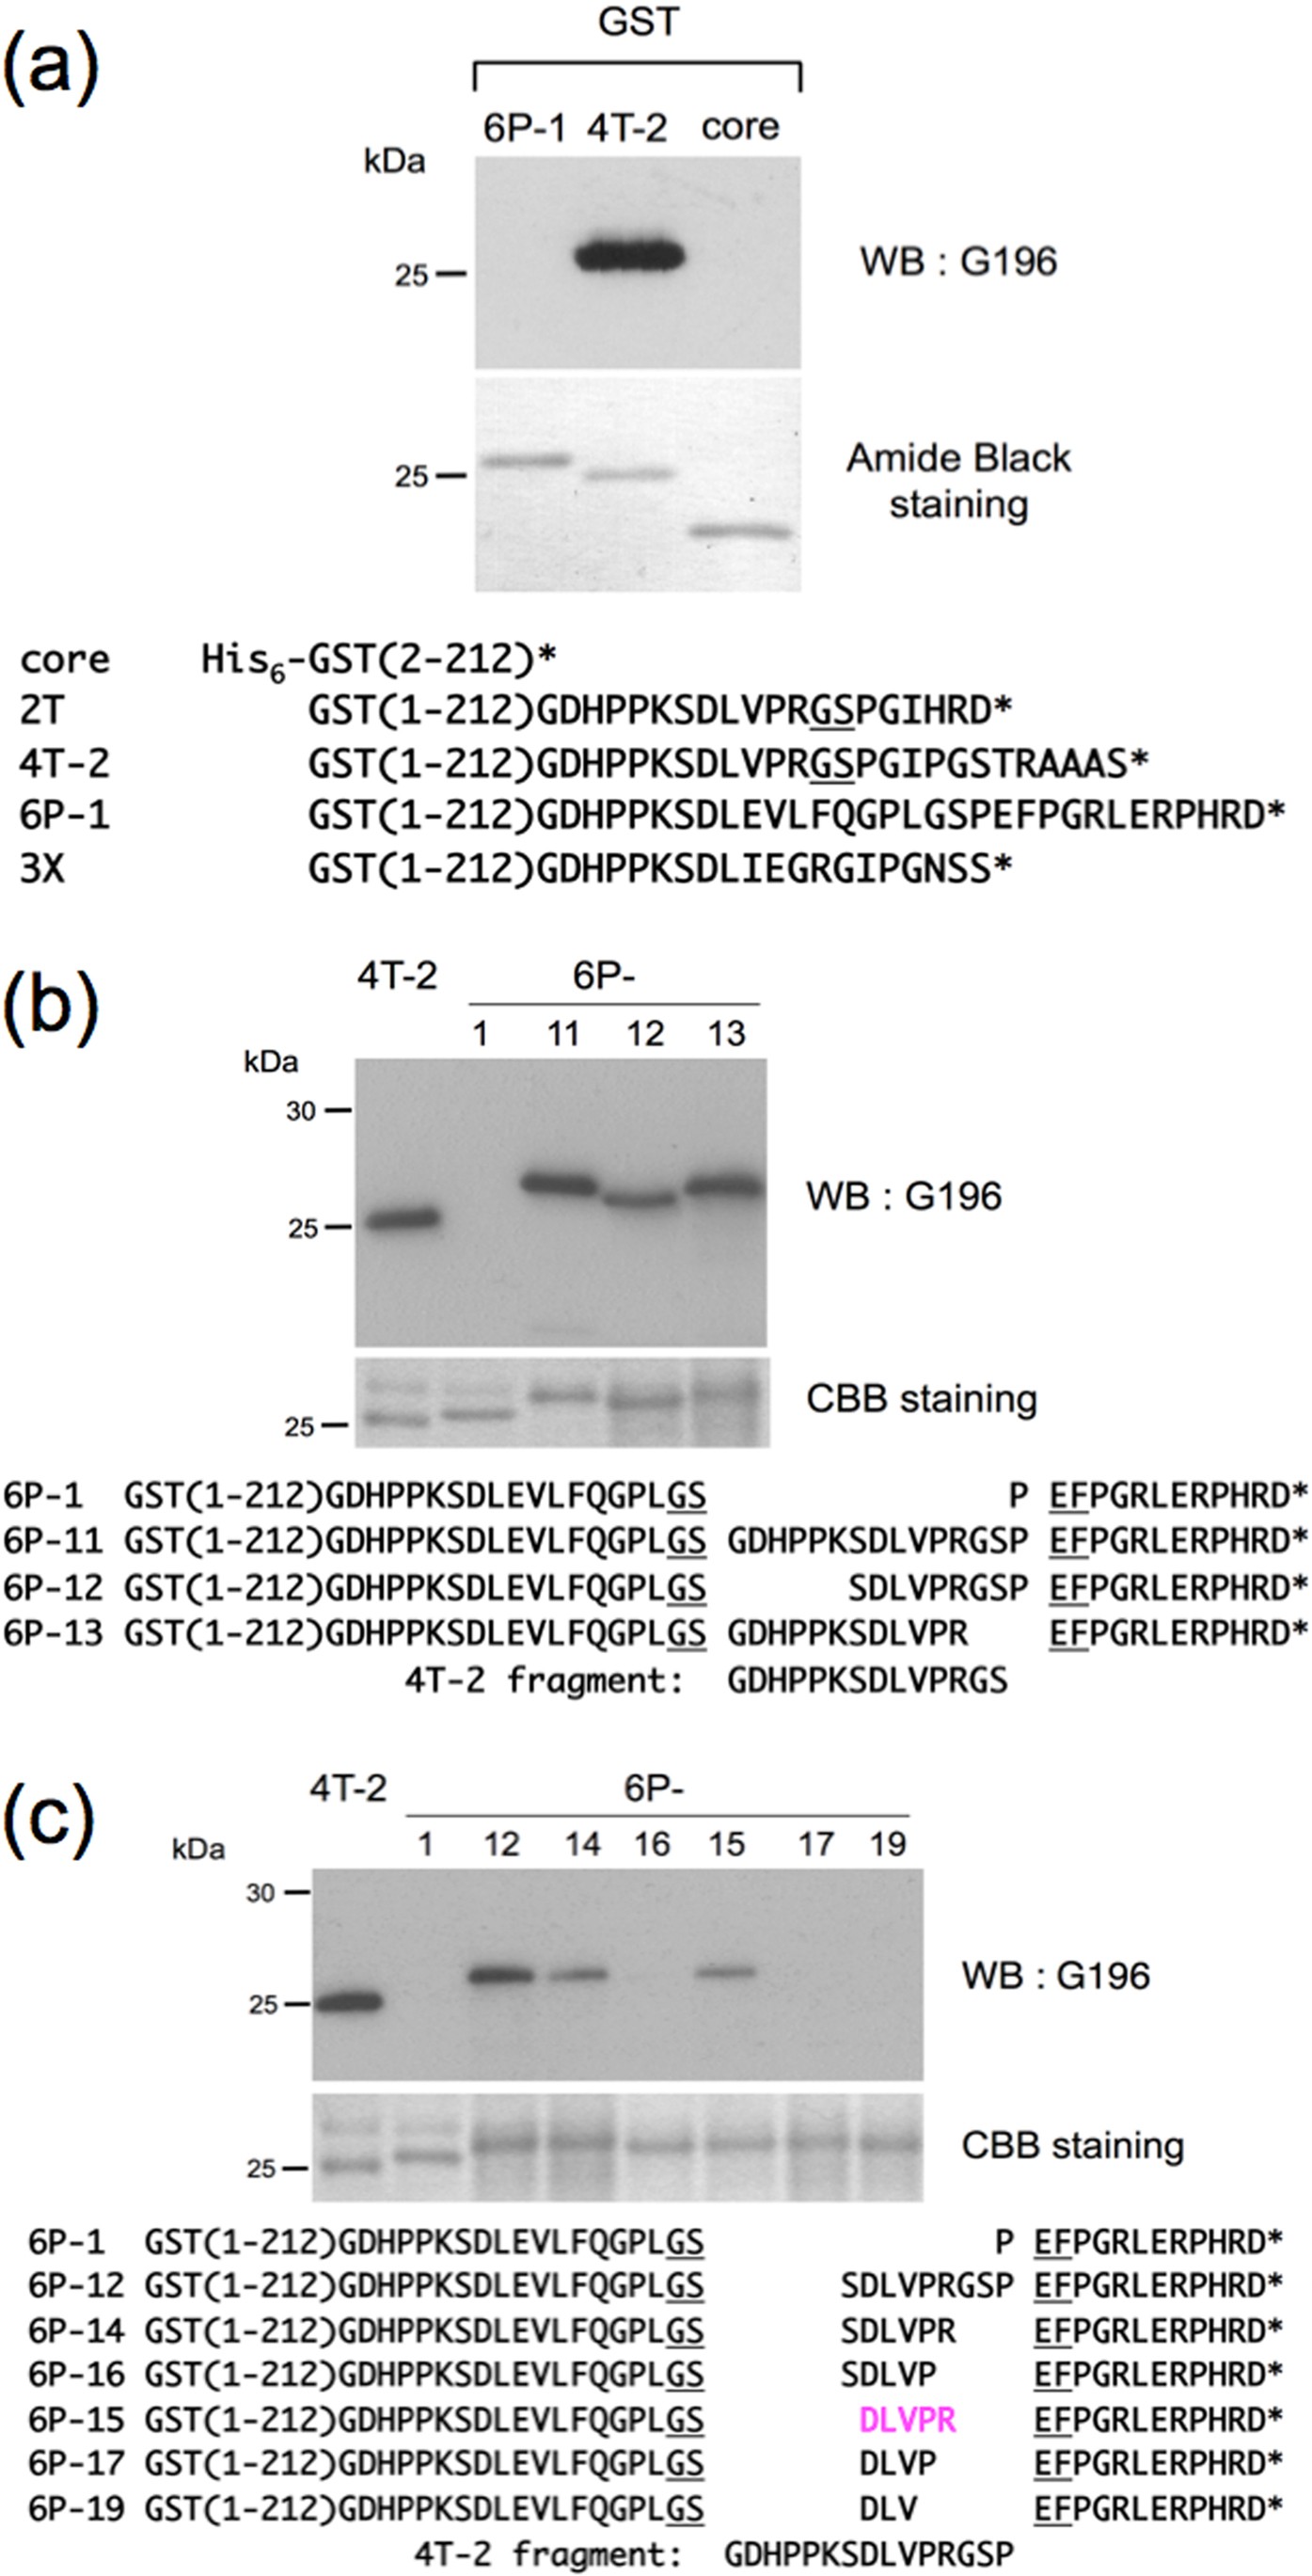 G196 epitope tag system: a novel monoclonal antibody, G196, recognizes the  small, soluble peptide DLVPR with high affinity | Scientific Reports